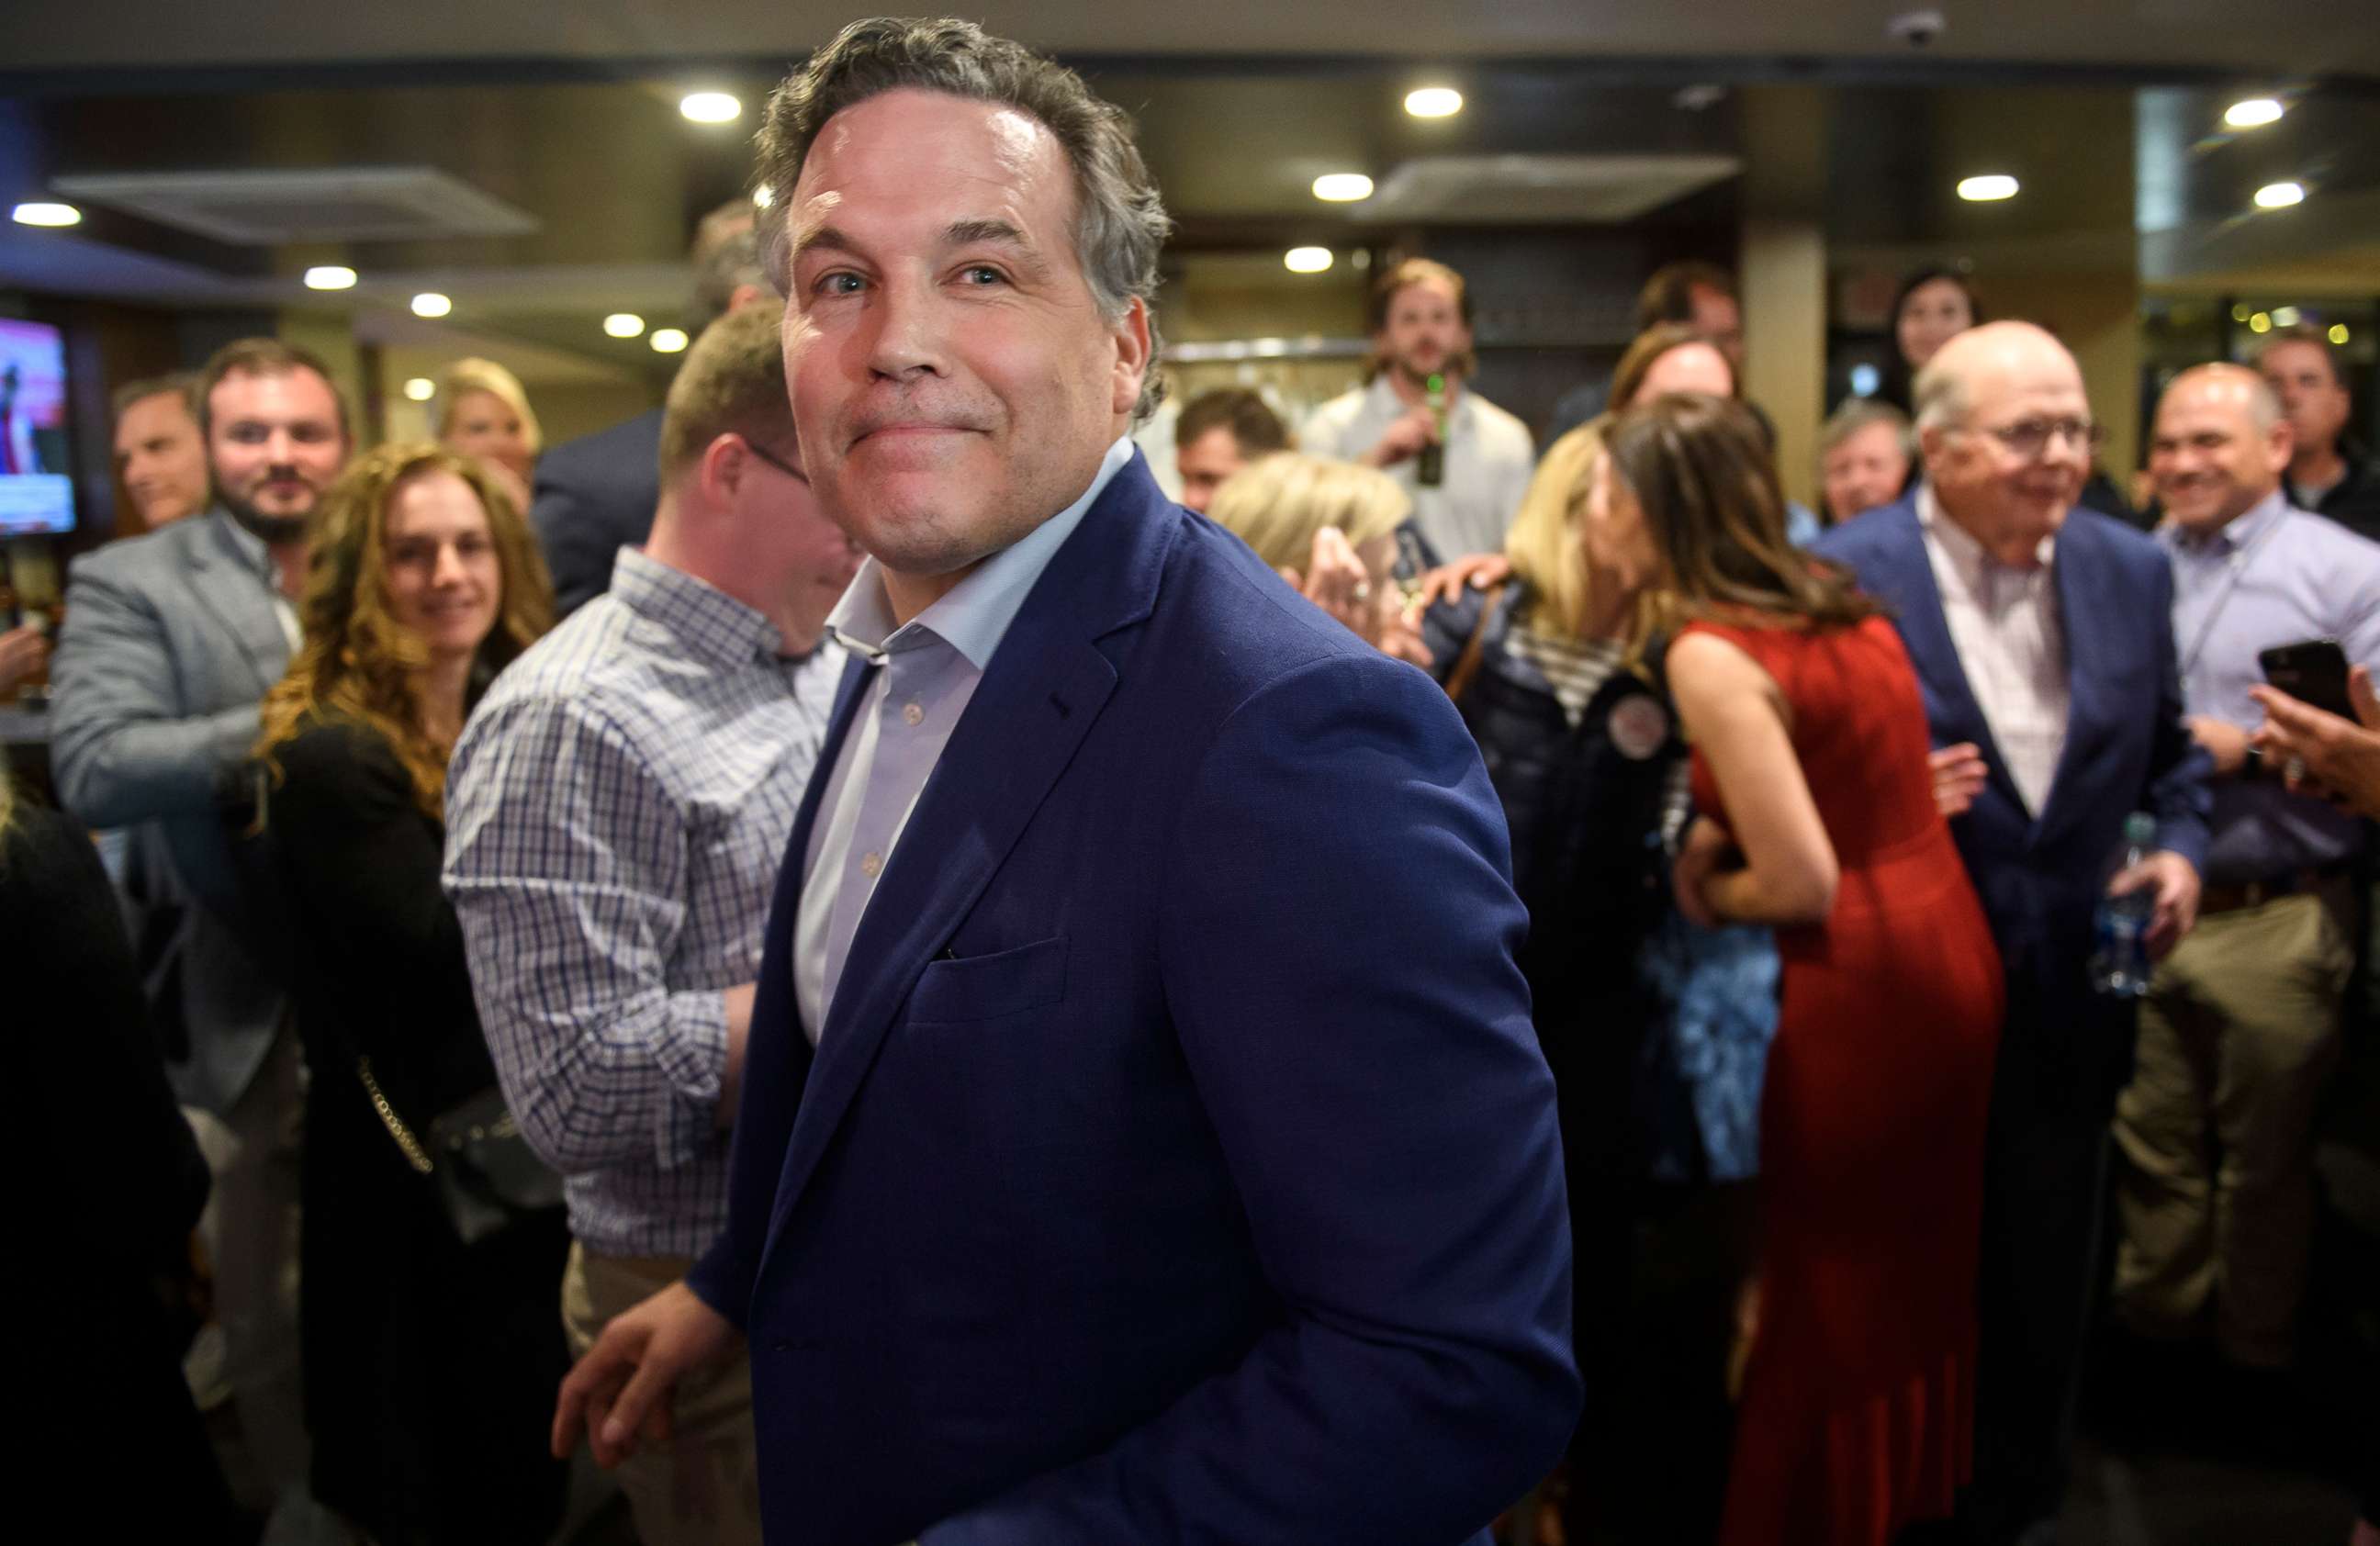 PHOTO: Pennsylvania Republican Senate candidate David McCormick greets supporters at the Indigo Hotel during a primary election night event on May 17, 2022, in Pittsburgh, Pa.